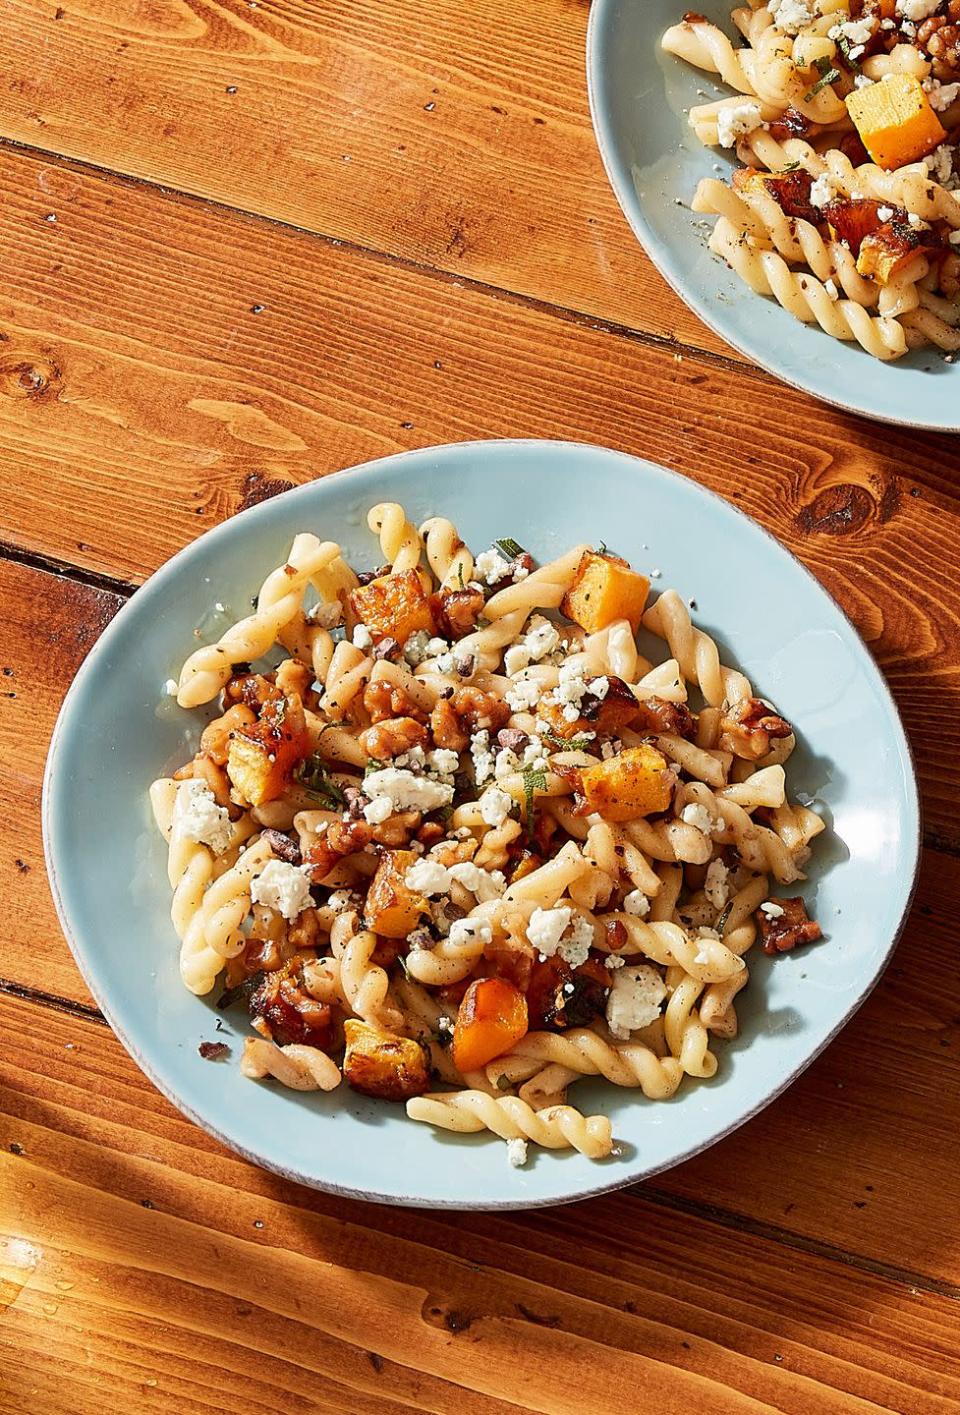 <p>This pasta—with <a href="https://www.delish.com/cooking/recipe-ideas/a22620161/how-to-roast-butternut-squash/" rel="nofollow noopener" target="_blank" data-ylk="slk:roasted butternut squash" class="link ">roasted butternut squash</a>, crispy sage, creamy gorgonzola, and toasted walnuts—SCREAMS fall without being too heavy. Want to add protein? We think this would be <em>amazing</em> with pancetta or bacon too.</p><p>Get the <strong><a href="https://www.delish.com/cooking/recipe-ideas/a37070743/butternut-squash-pasta-recipe/" rel="nofollow noopener" target="_blank" data-ylk="slk:Roasted Butternut Squash Pasta recipe" class="link ">Roasted Butternut Squash Pasta recipe</a></strong>.</p>